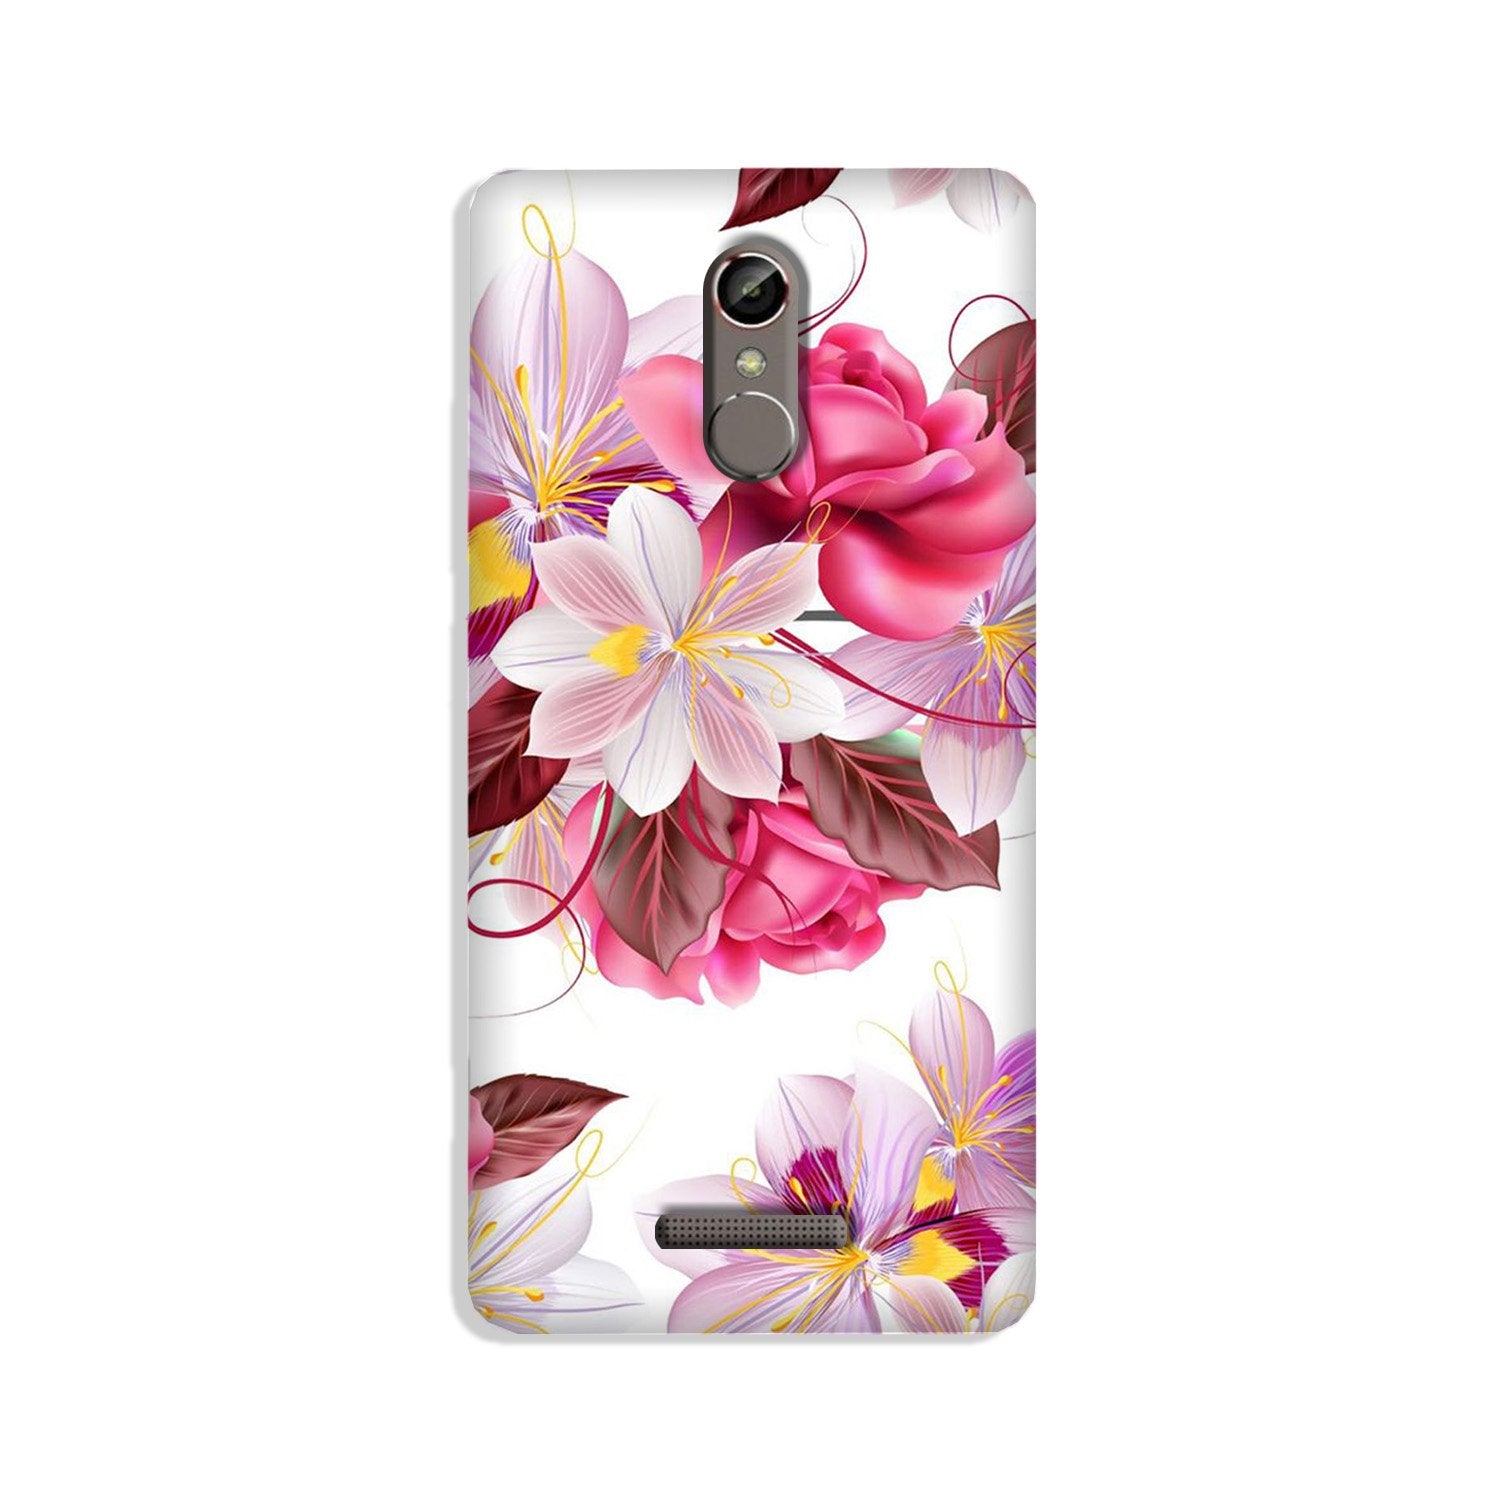 Beautiful flowers Case for Redmi Note 3